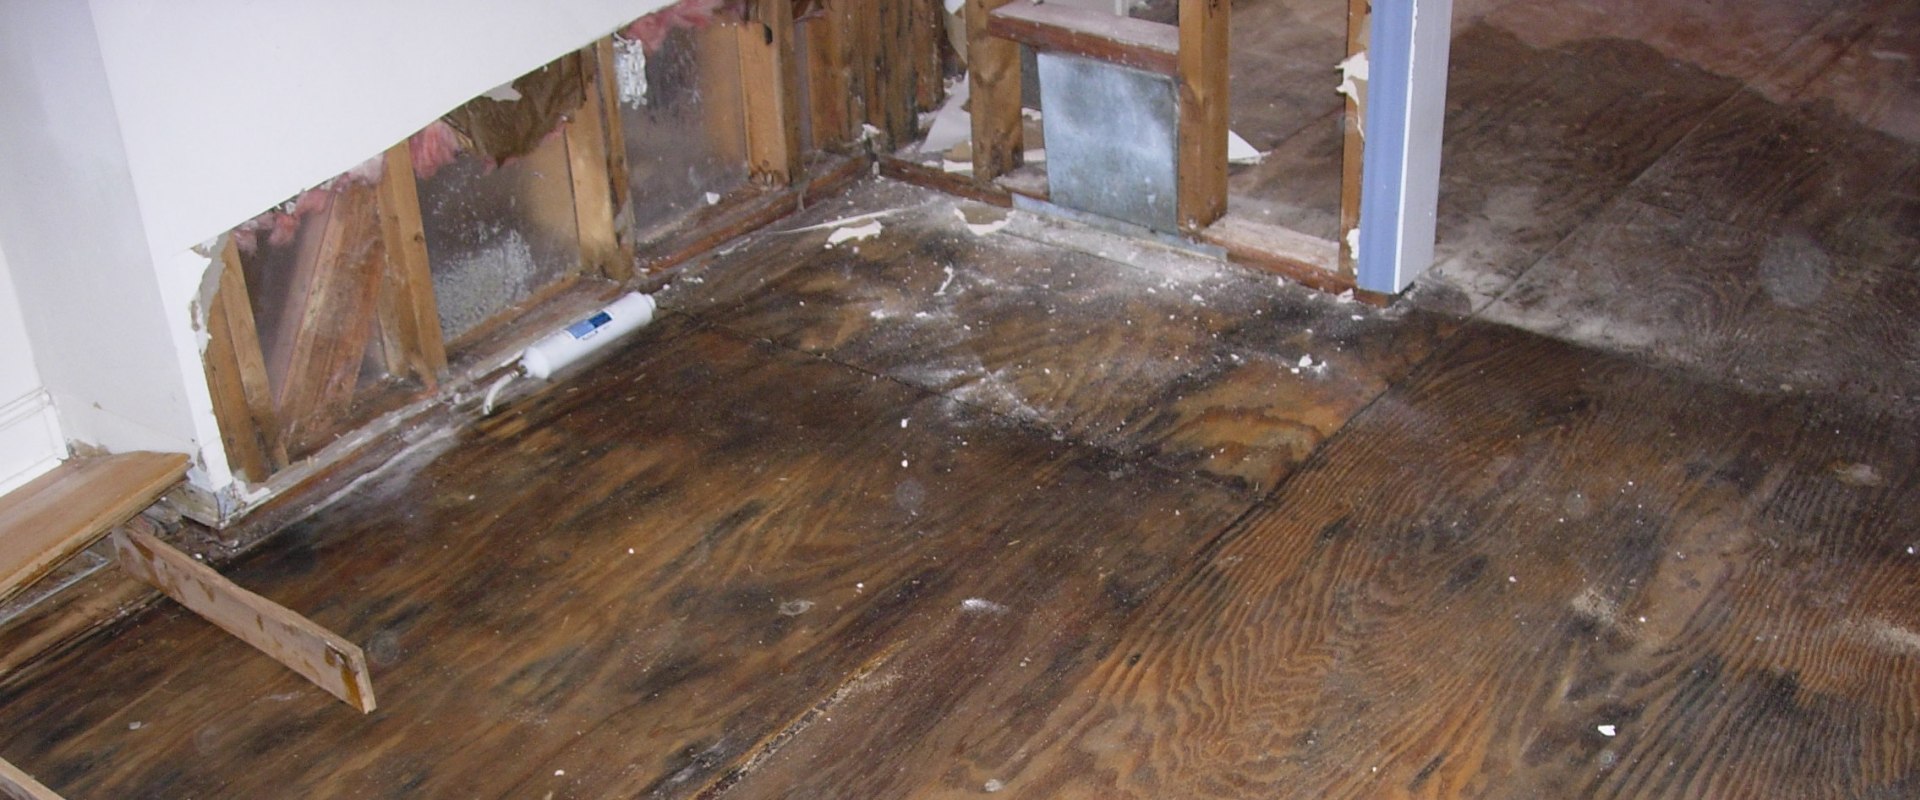 How serious is water damage in a house?